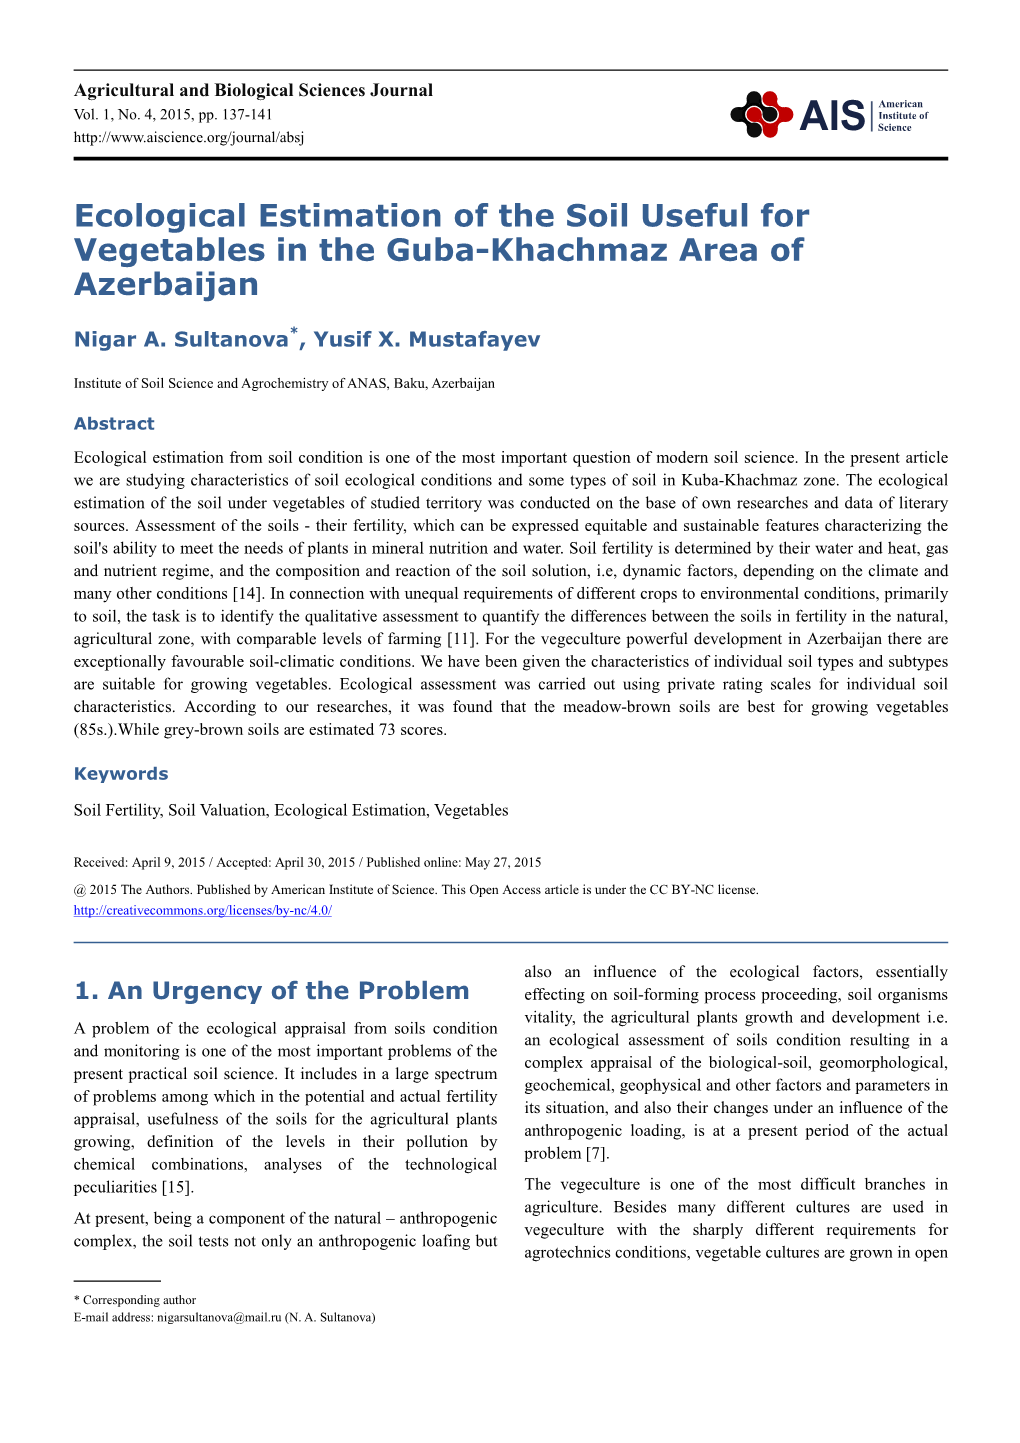 Ecological Estimation of the Soil Useful for Vegetables in the Guba-Khachmaz Area of Azerbaijan